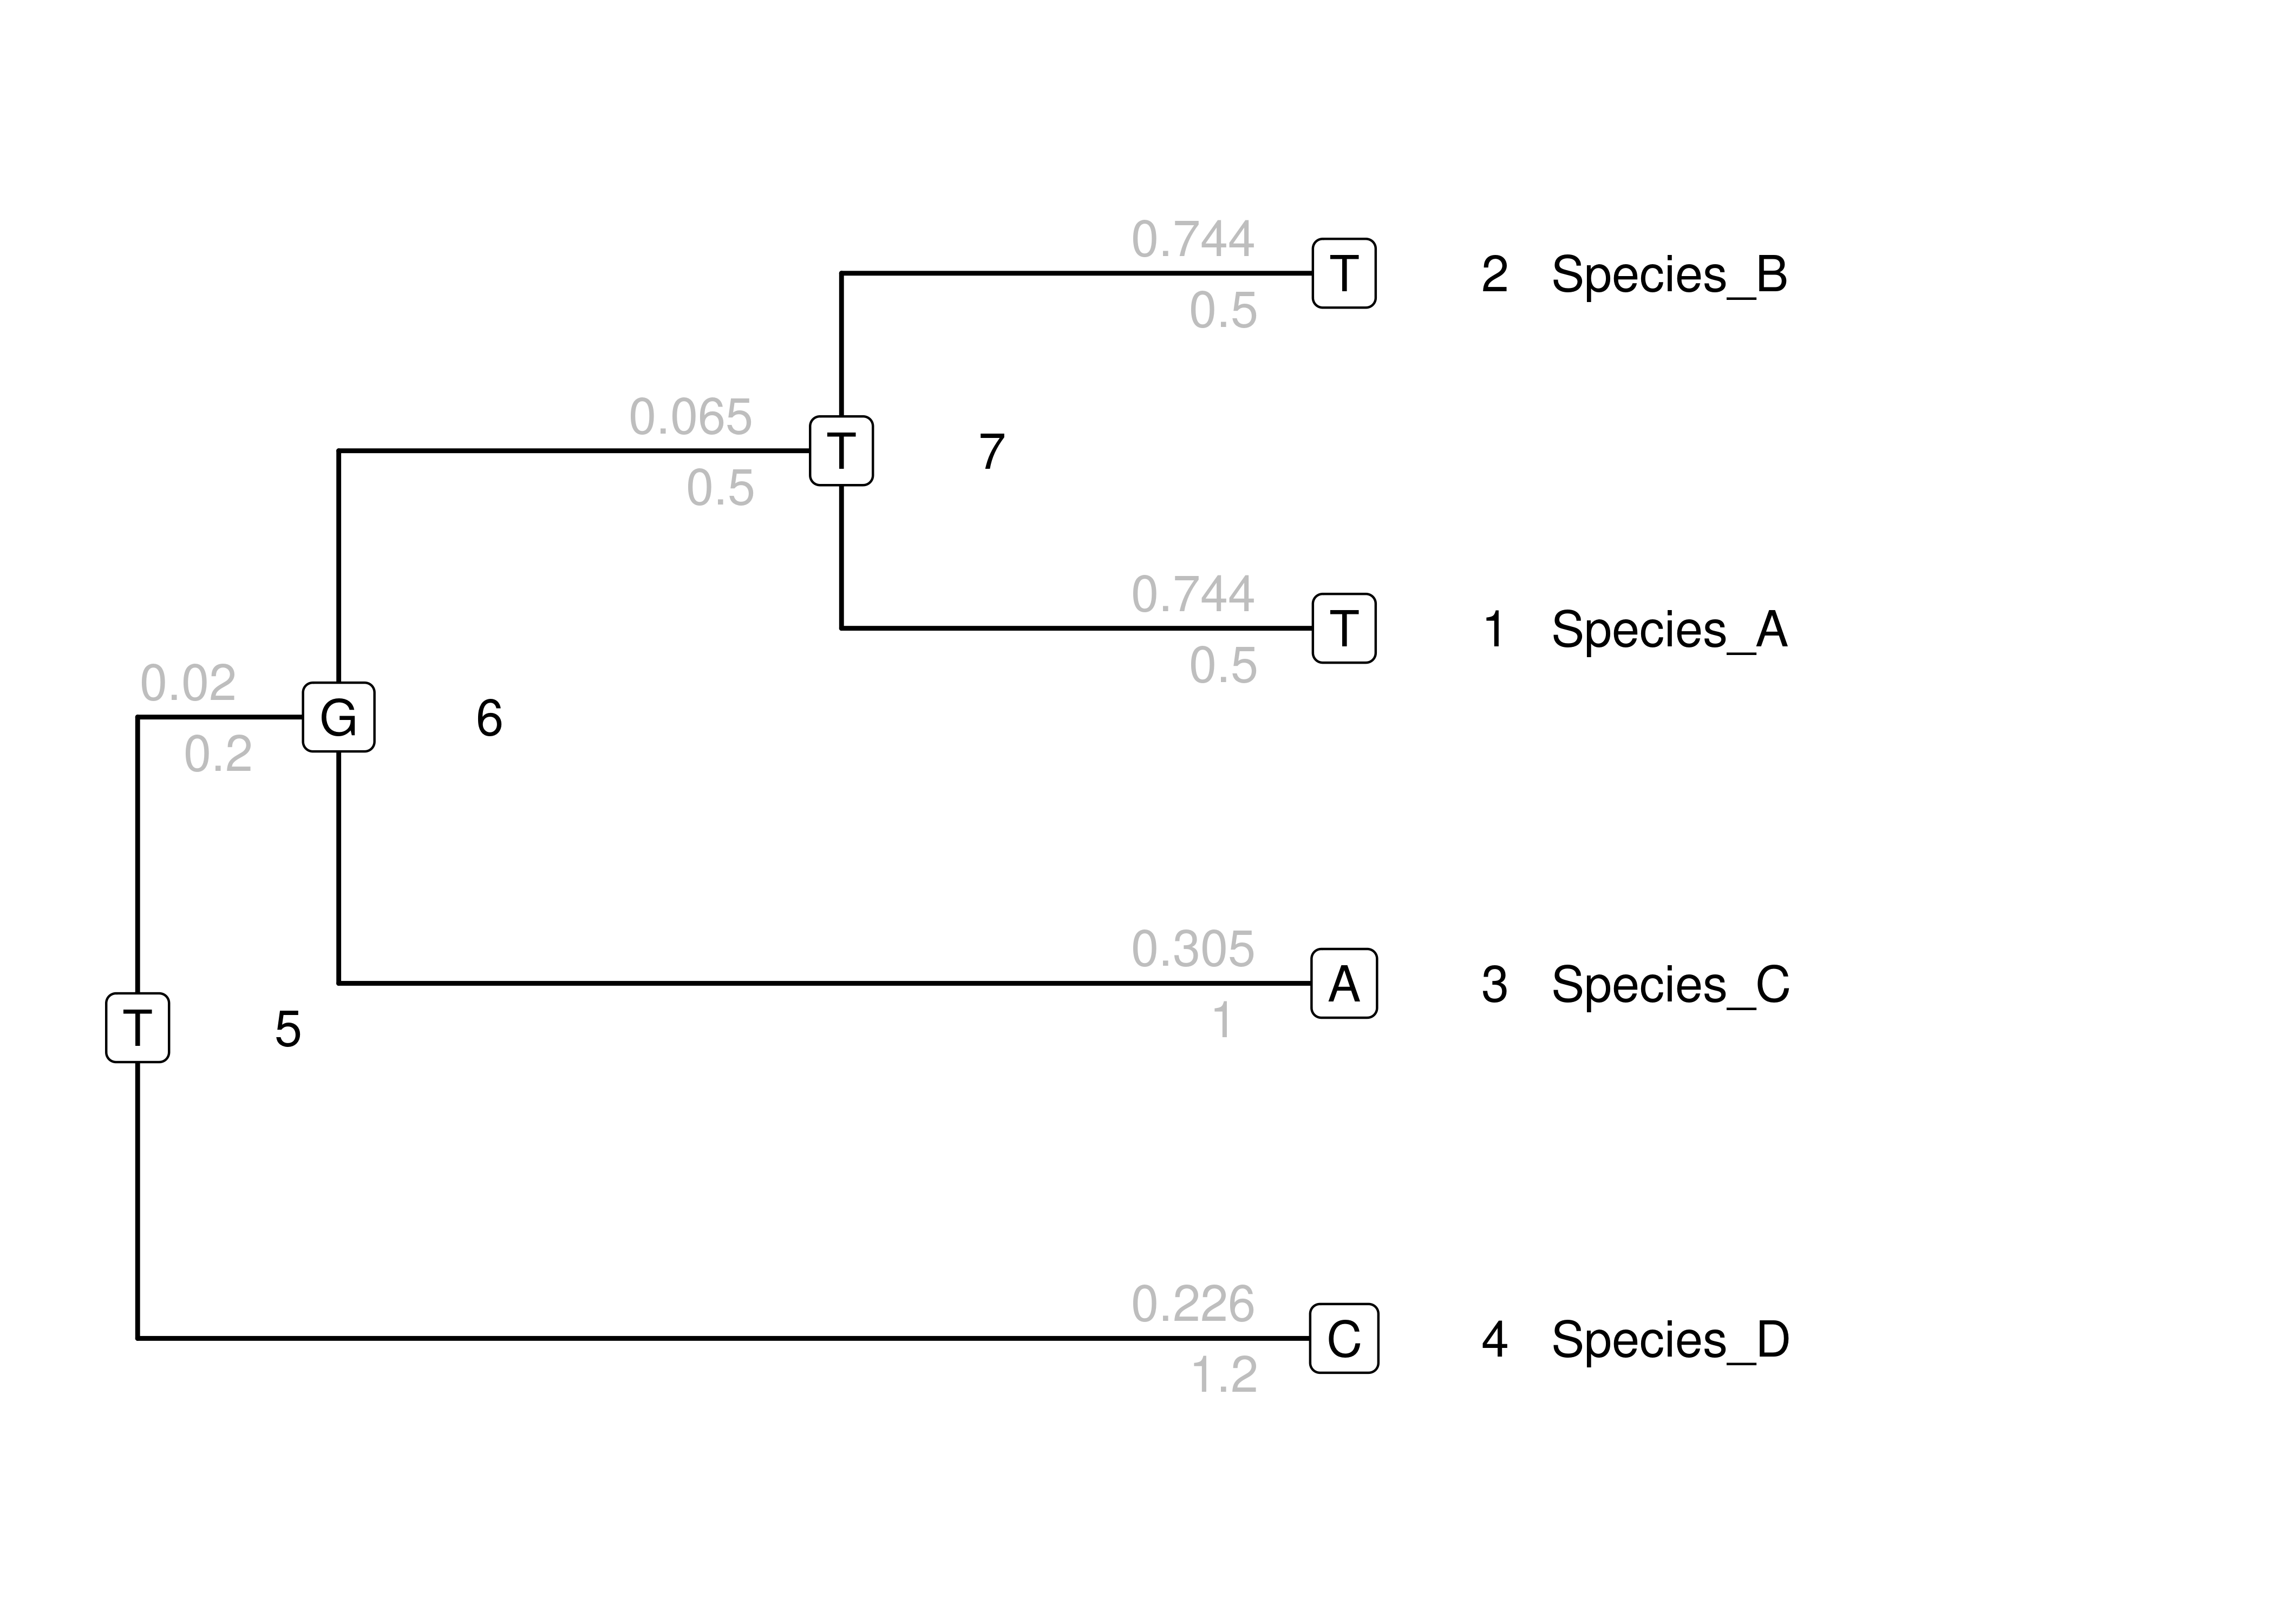 The same toy tree as above, but with probabilities of the specific change along each branch above each branch (in gray).